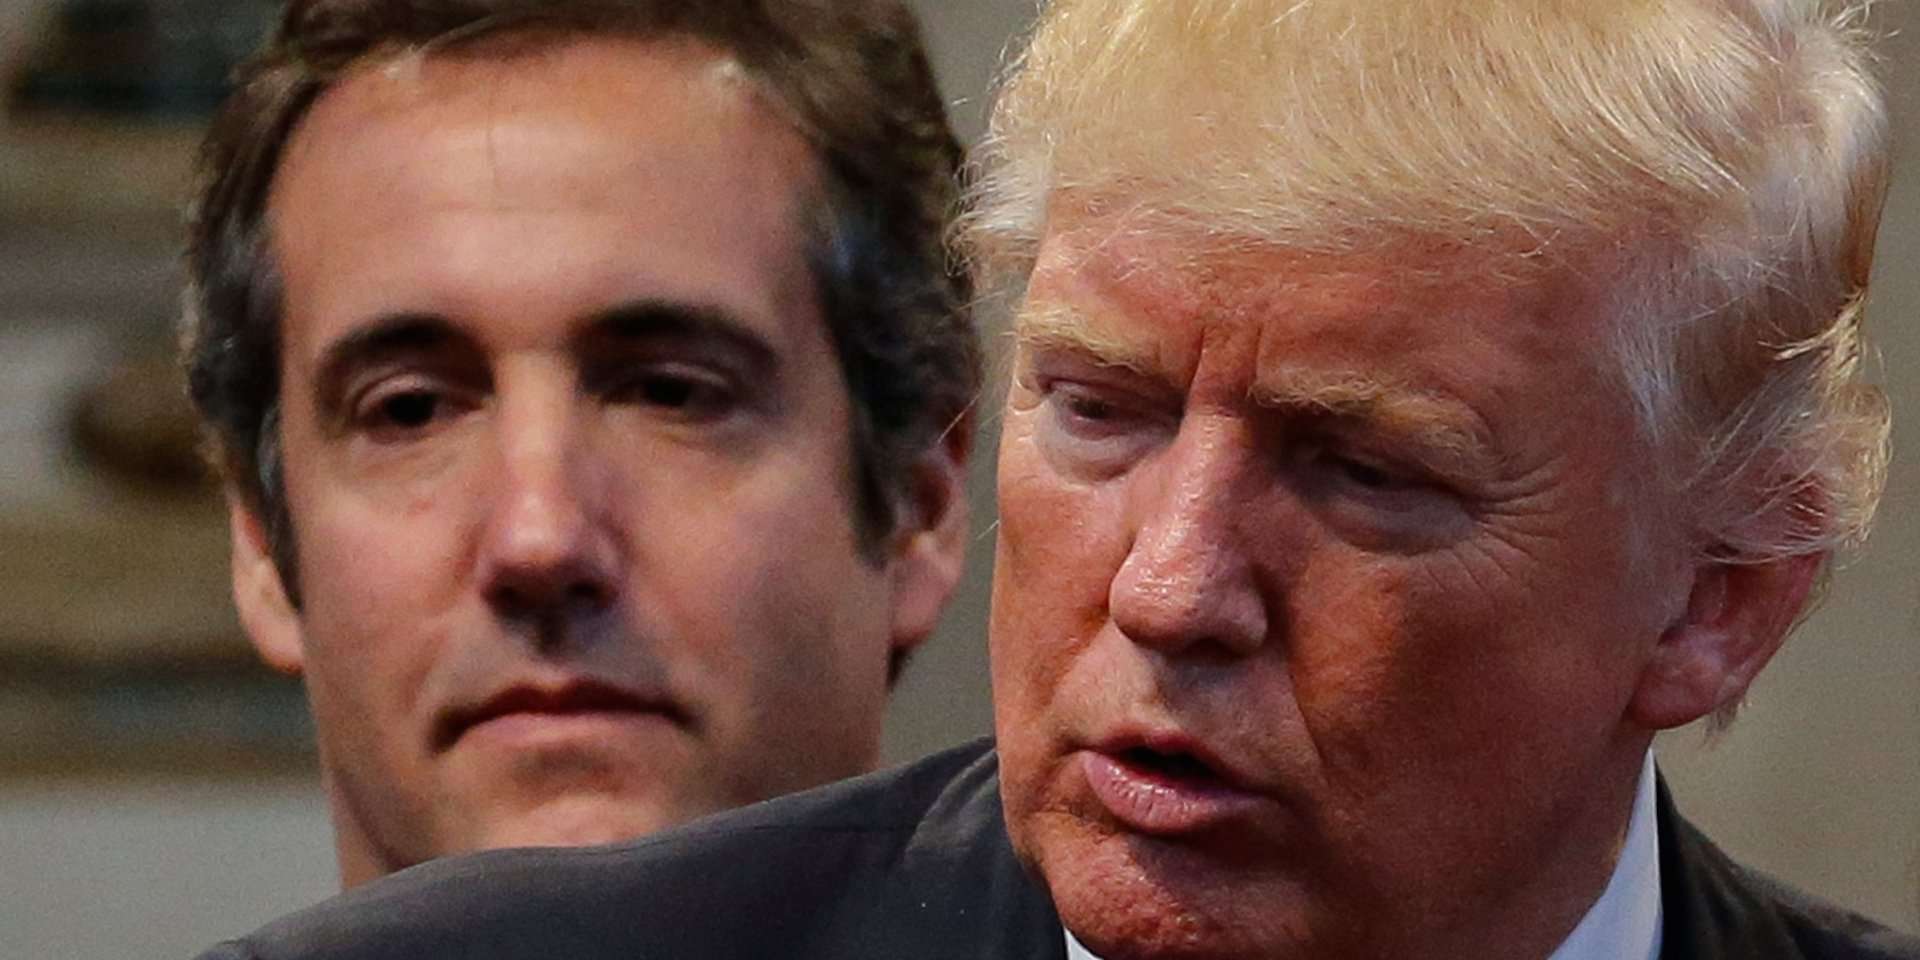 Taboola Ad Example 63793 - 'He Is A Racist. He Is A Conman.' Michael Cohen's Most Explosive Claims About Trump In His Blockbuster Hearing